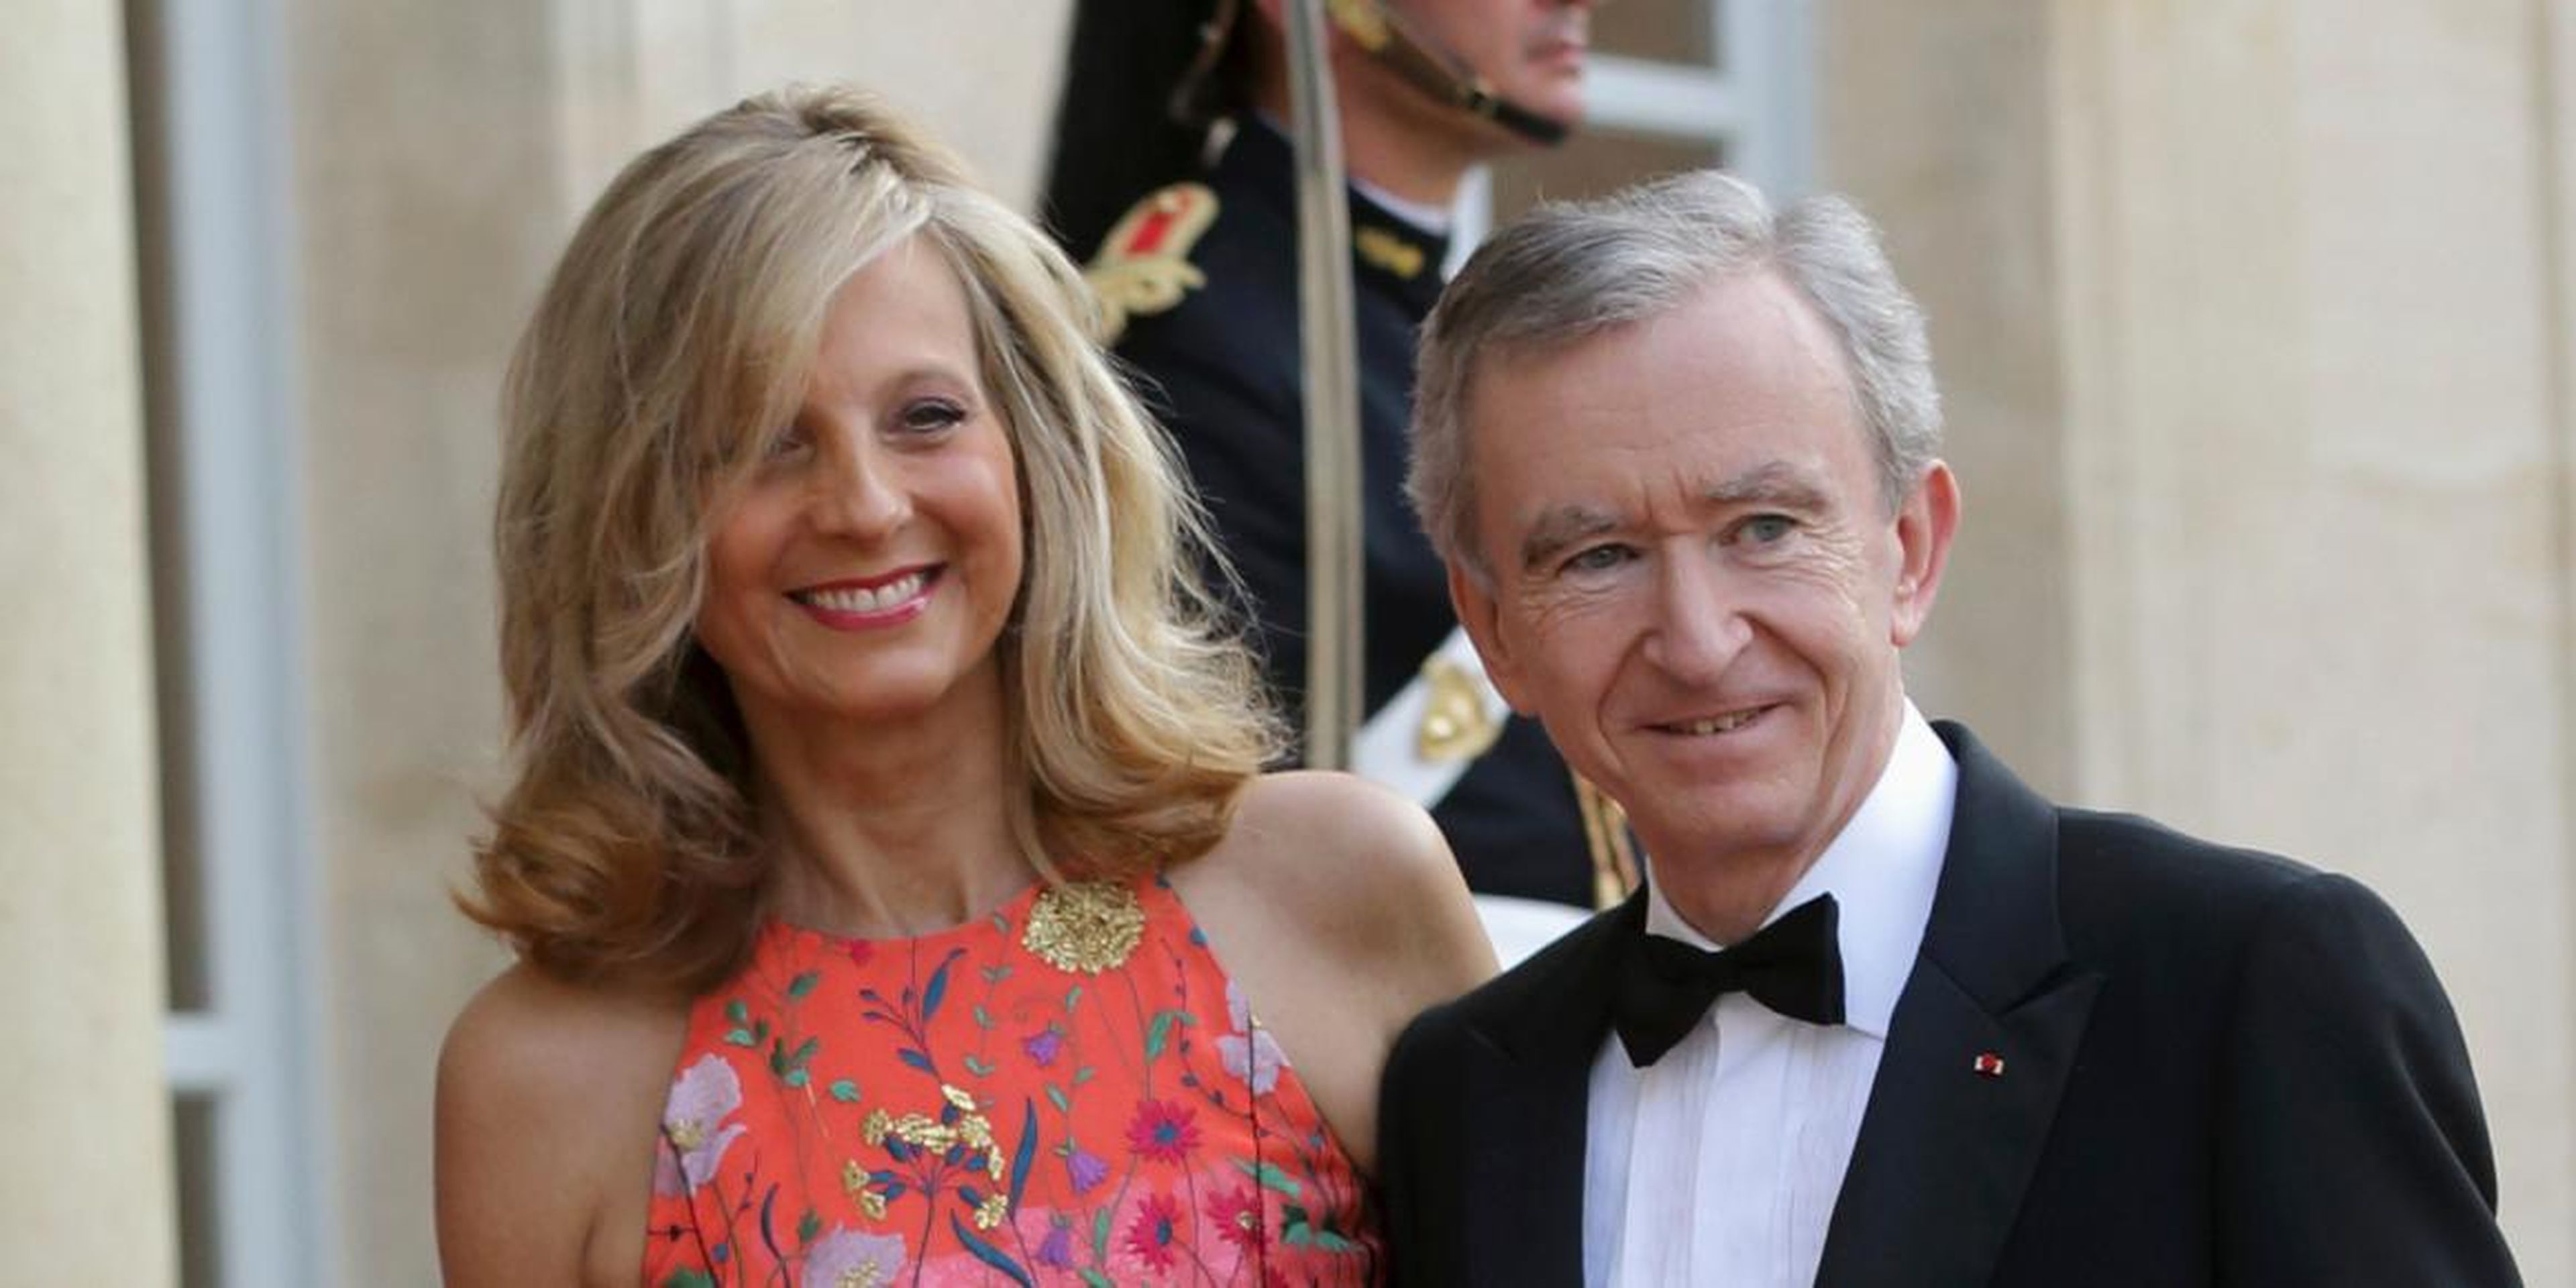 The French billionaire Bernard Arnault and his wife, Hélène Mercier, at the Élysée Palace in June 2014. His family and their conglomerate, LVMH, have pledged 200 million euros to help the Notre-Dame reconstruction.